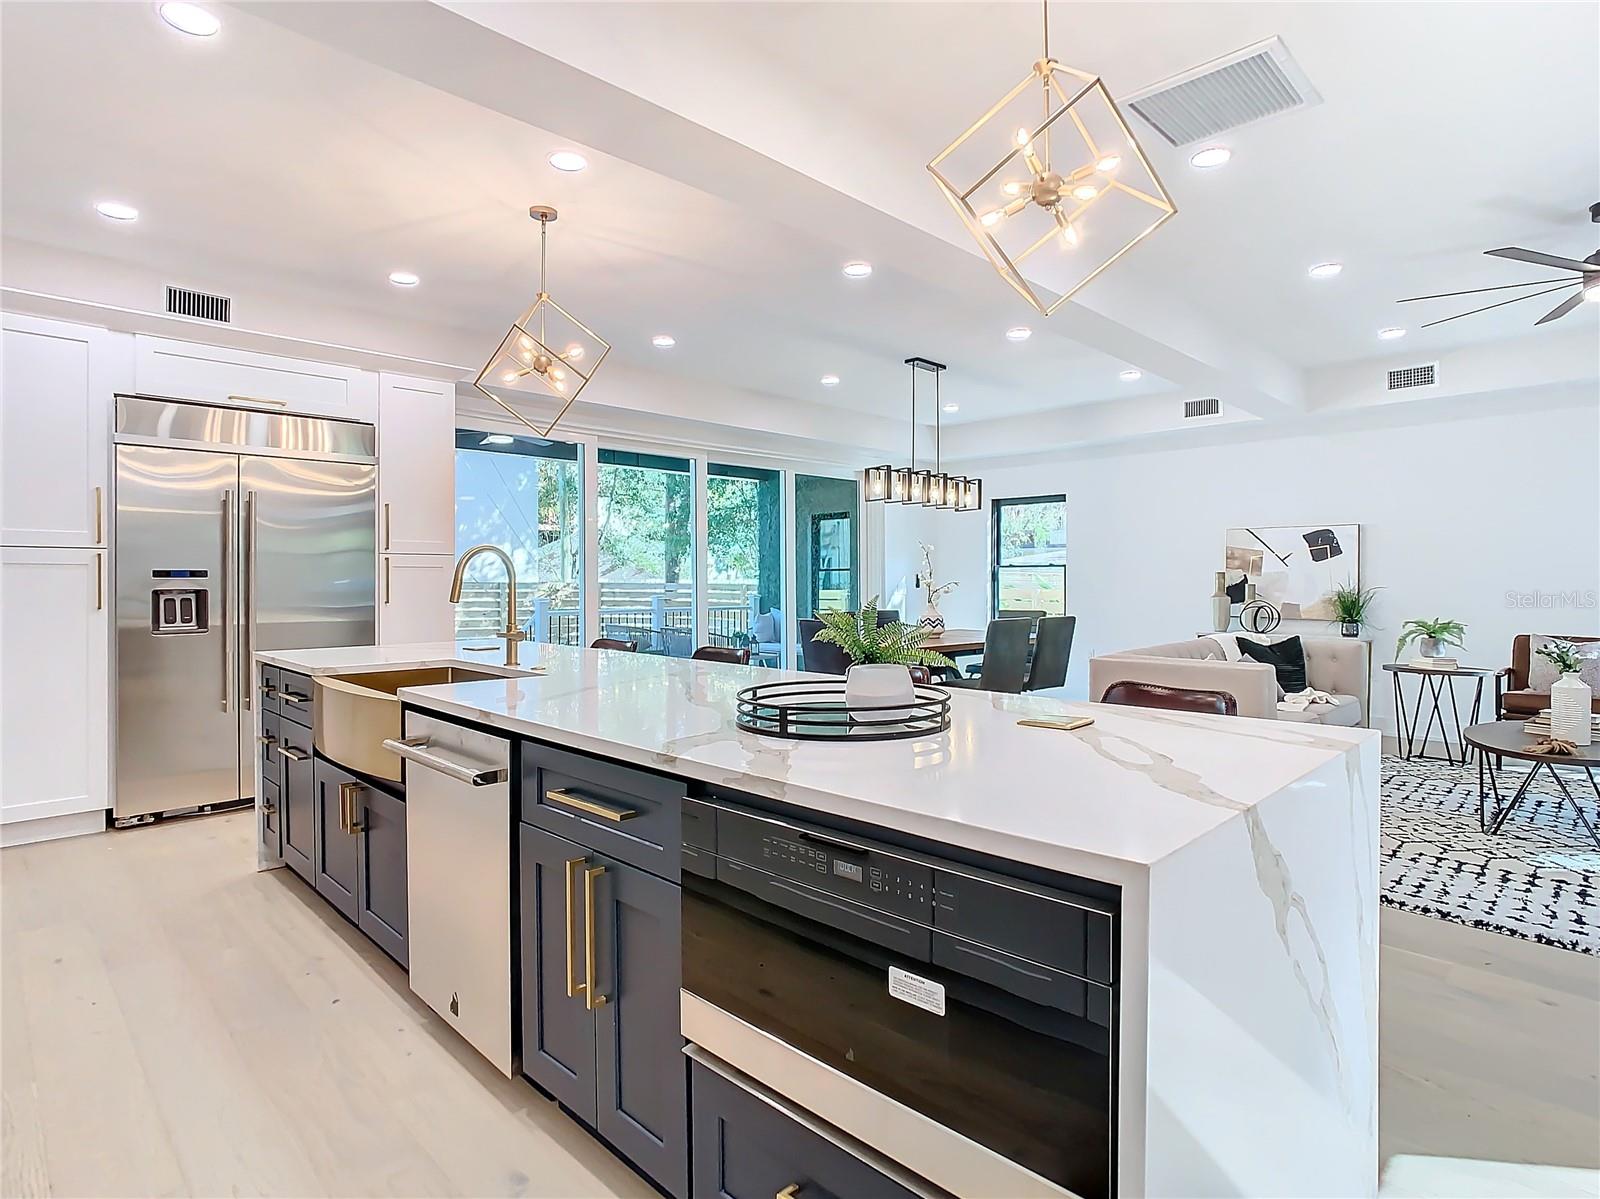 Chef kitchen features two-tone cabinets, Jenn-Aire double ovens, below island microwave, two-tone aoft close cabinets with luxury hardware, lighting, and vanishing USB Charging set inside quartz counters